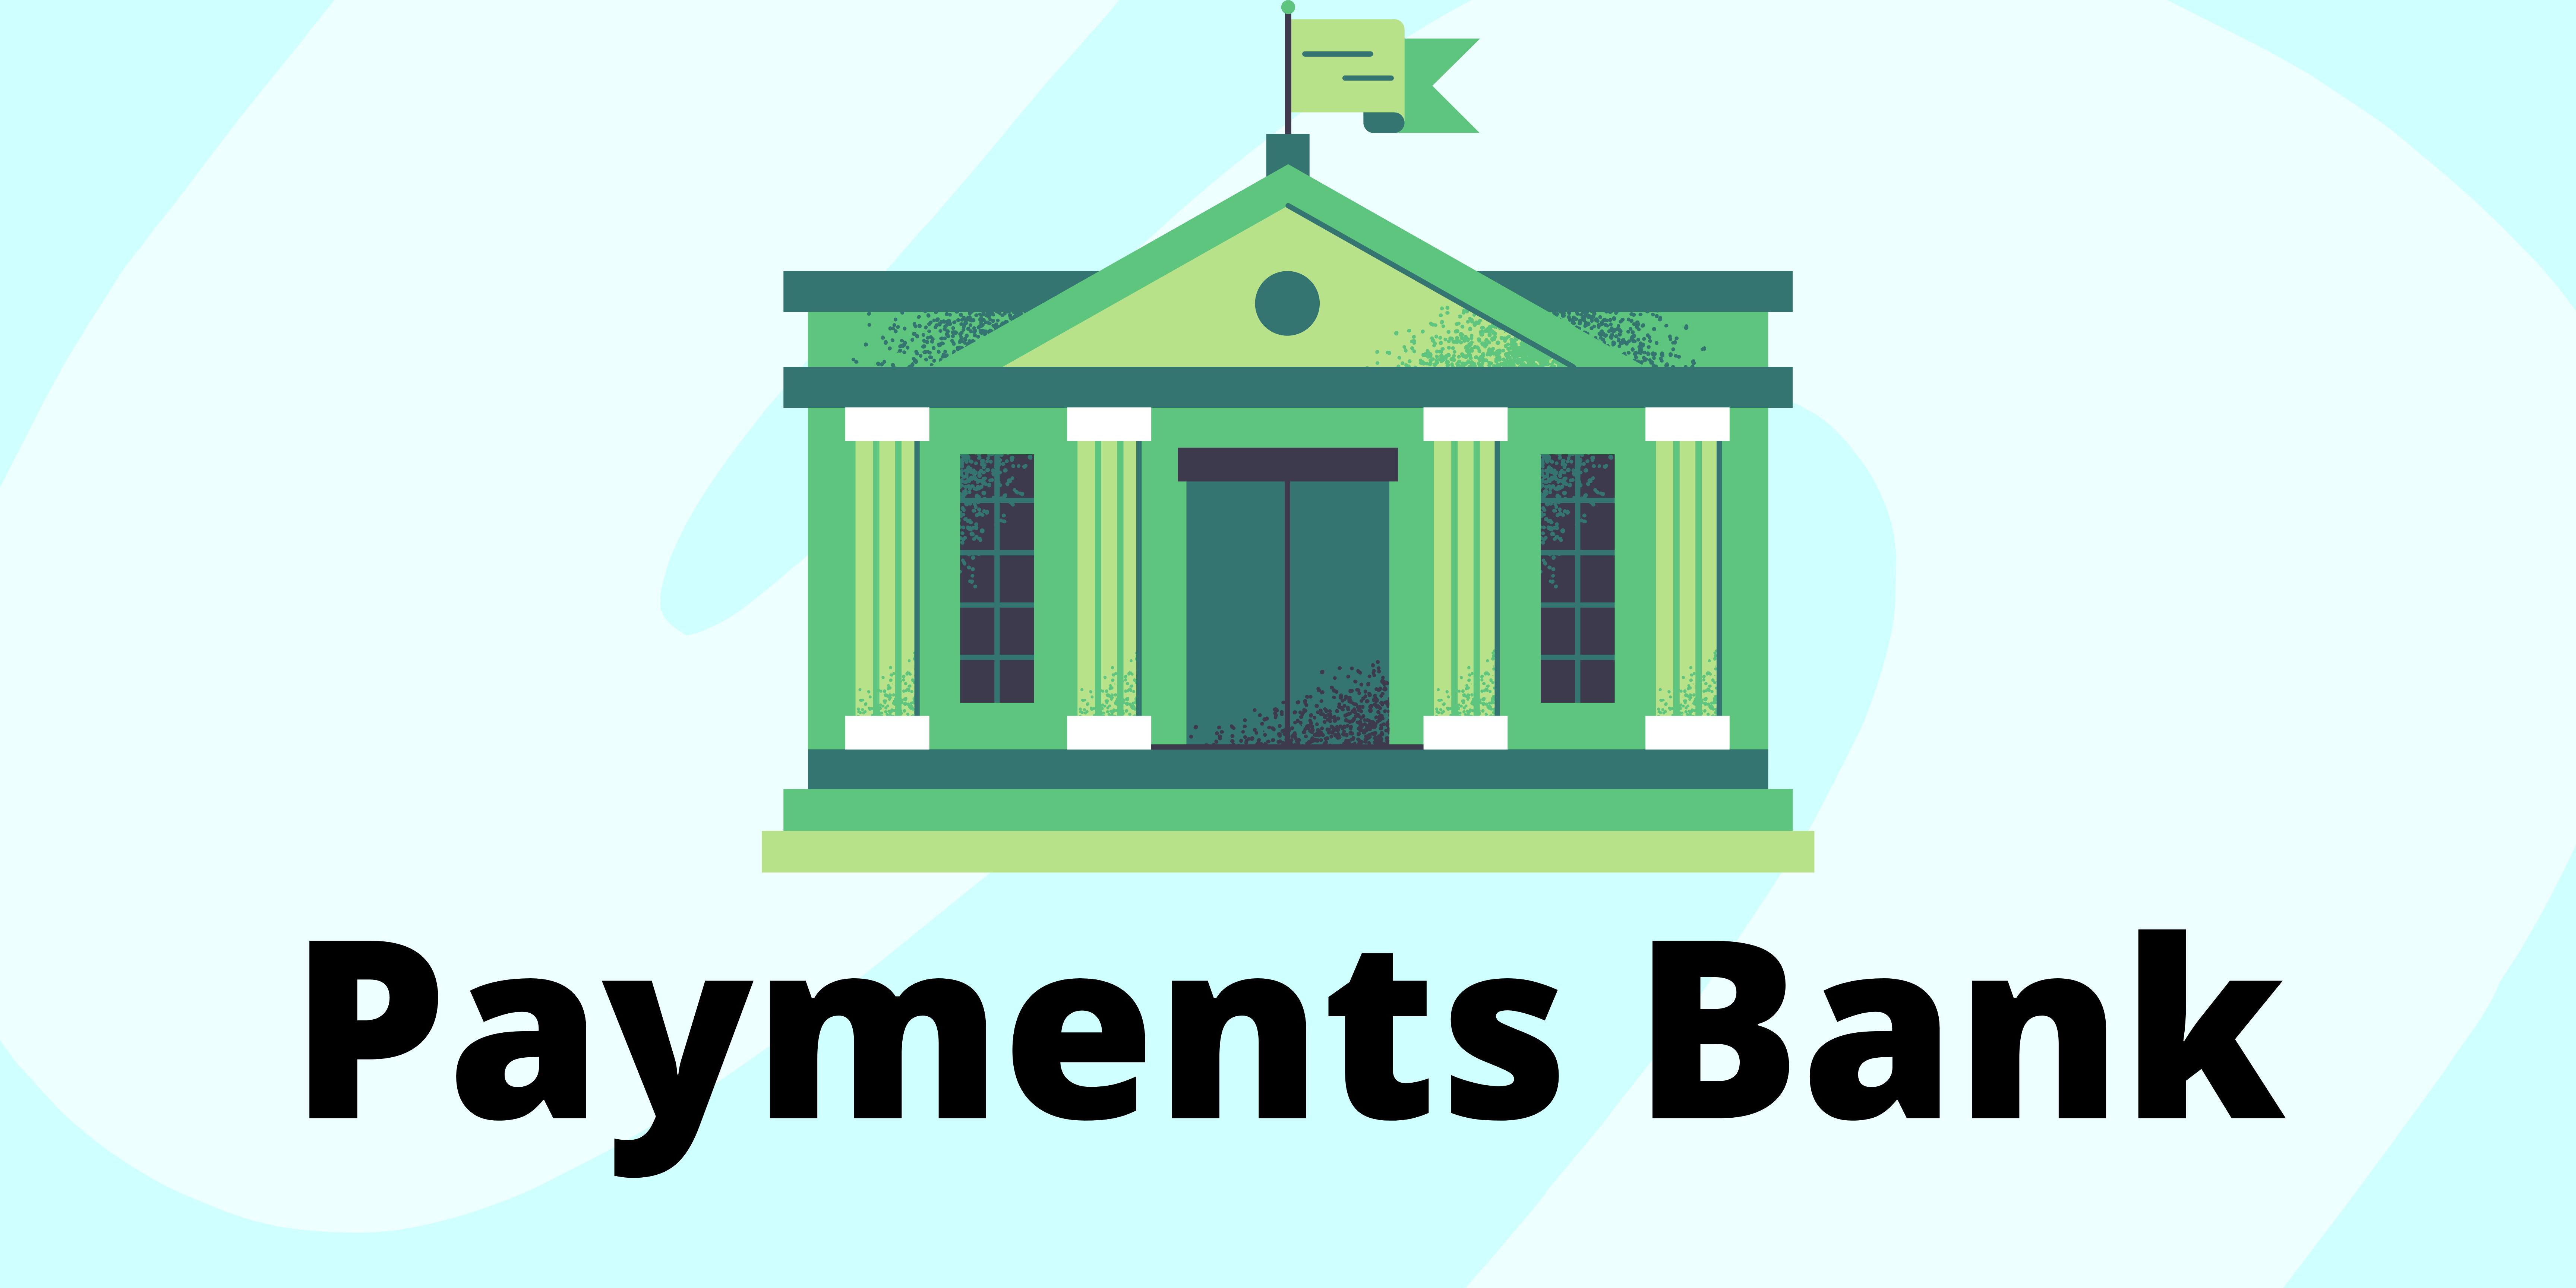 Payments Bank: Banking Services for Masses